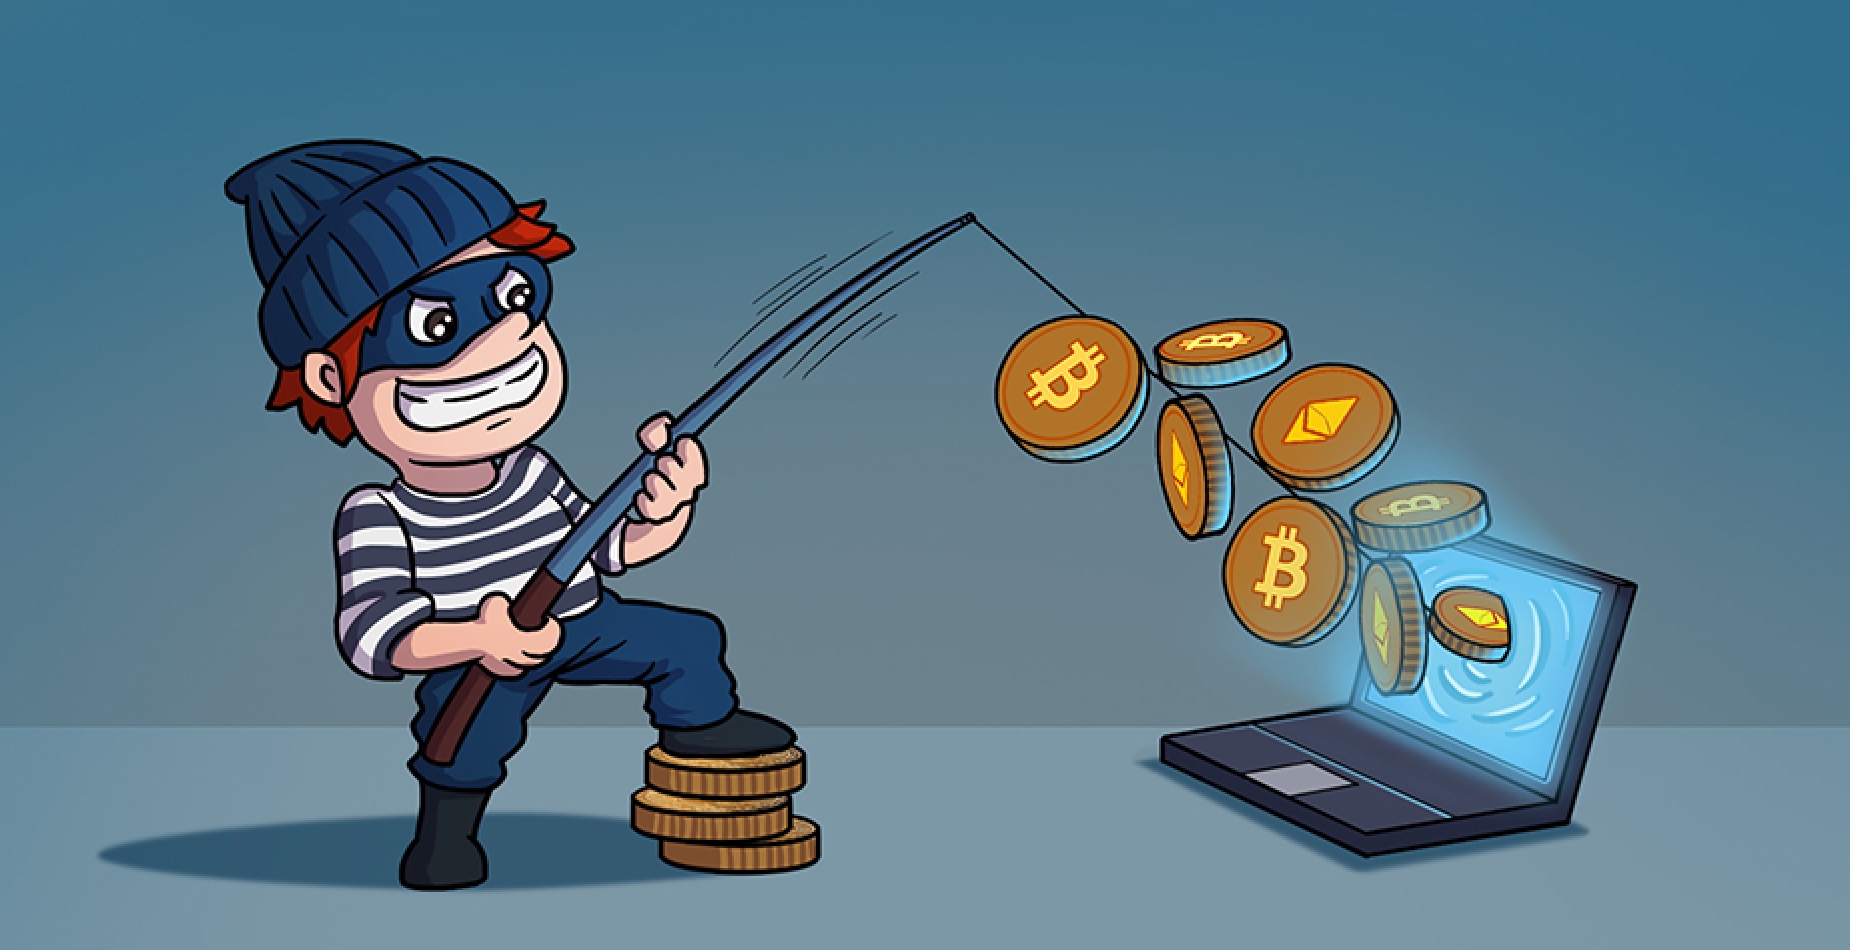 A thief using a fishing rod to fish cryptocurrency out of a laptop.